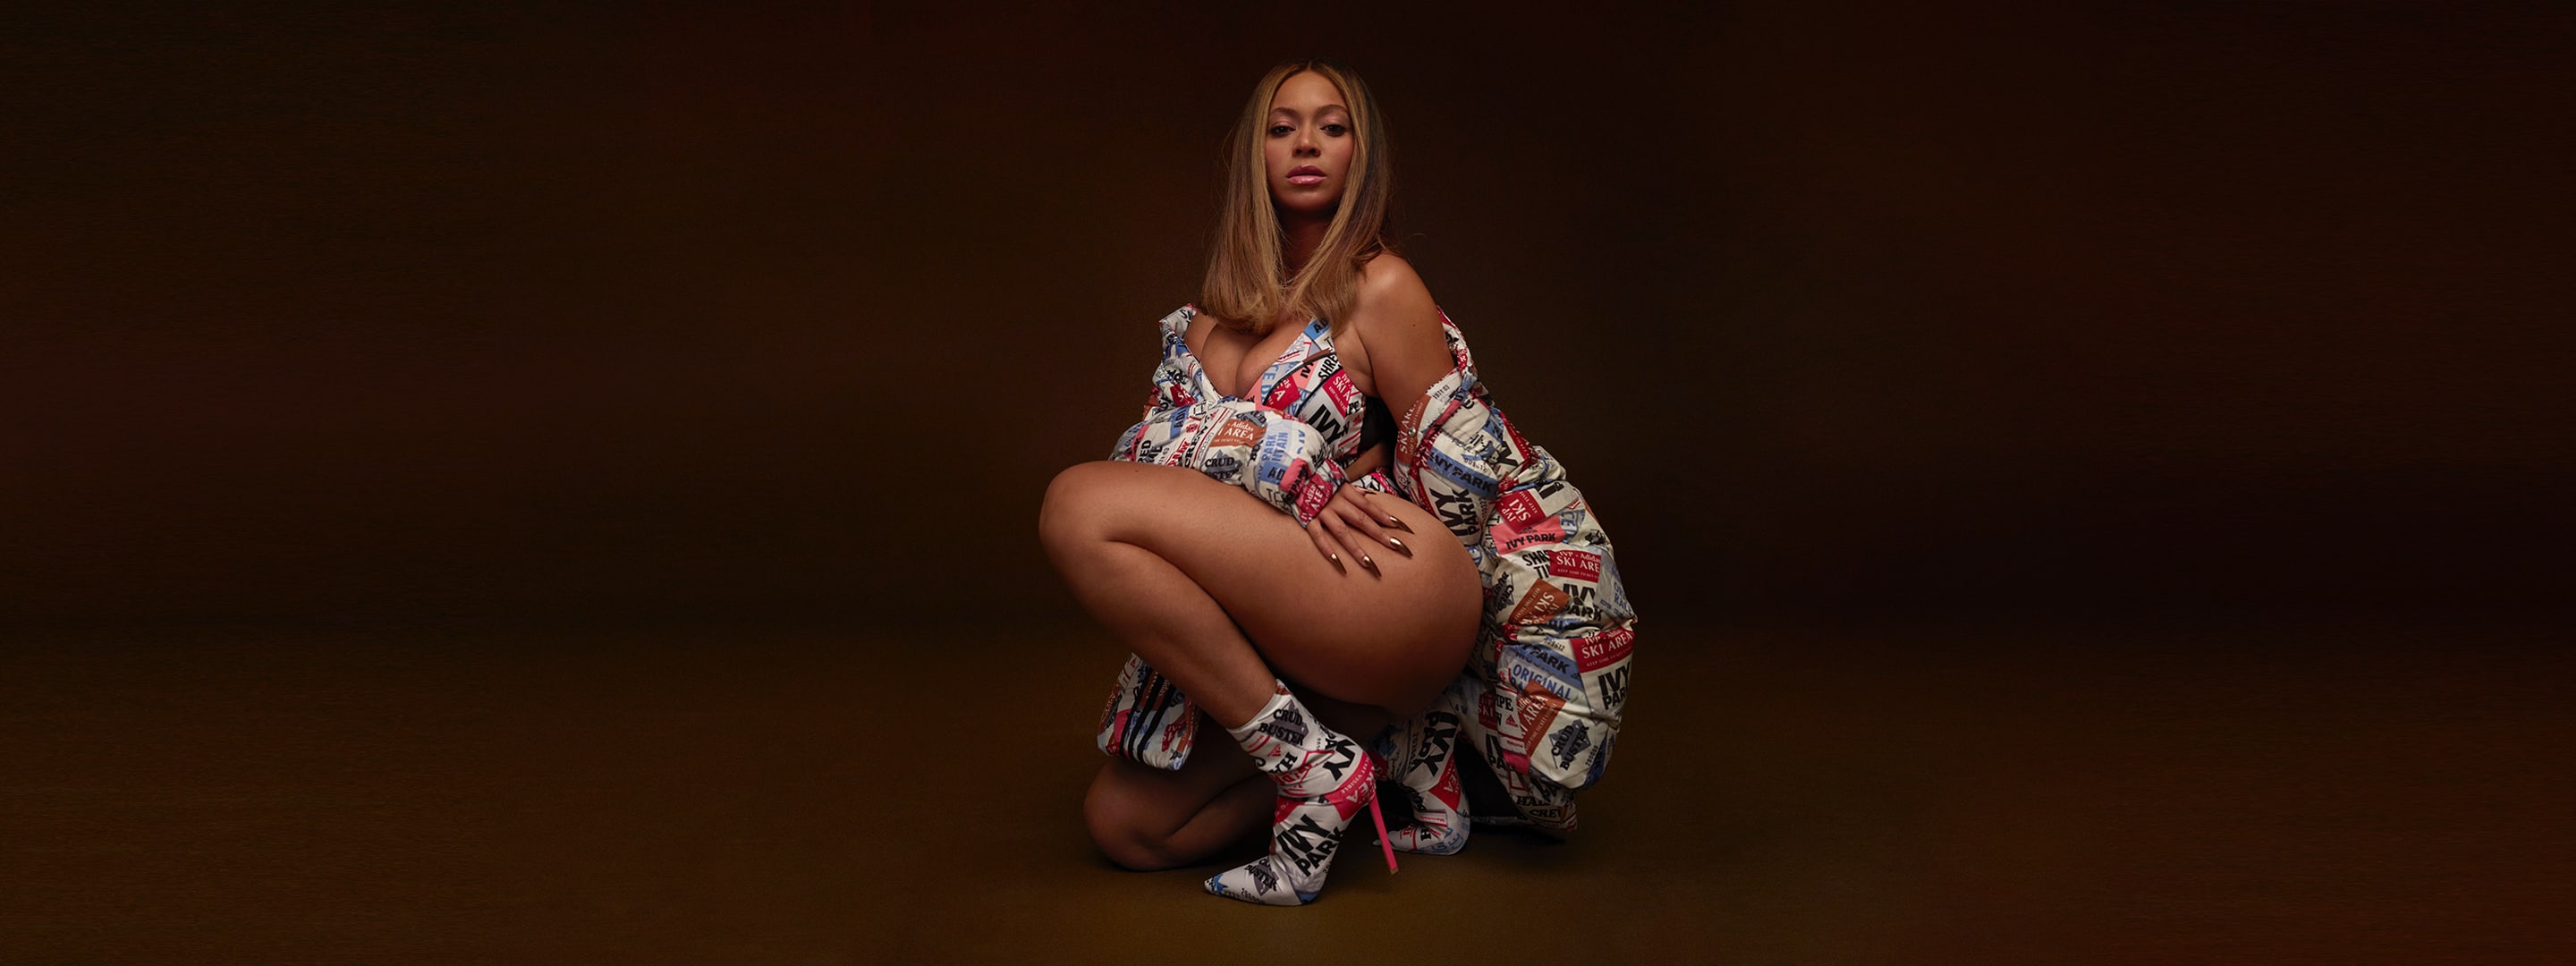 beyonce signed with adidas